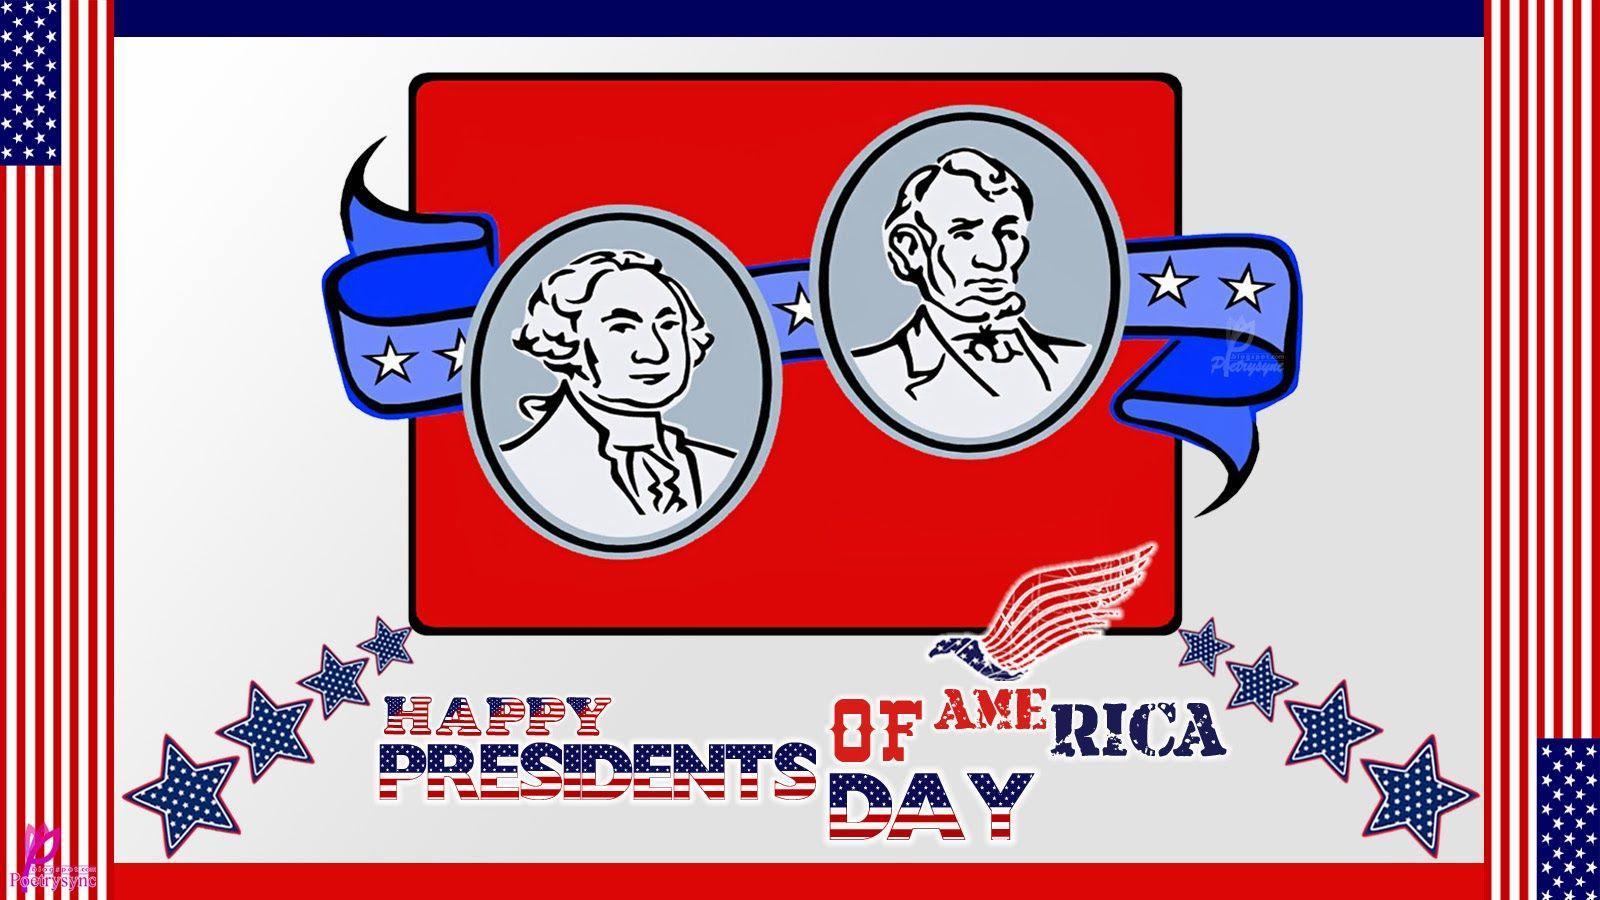 wish you happy presidents day. 7 presidents day image. 2